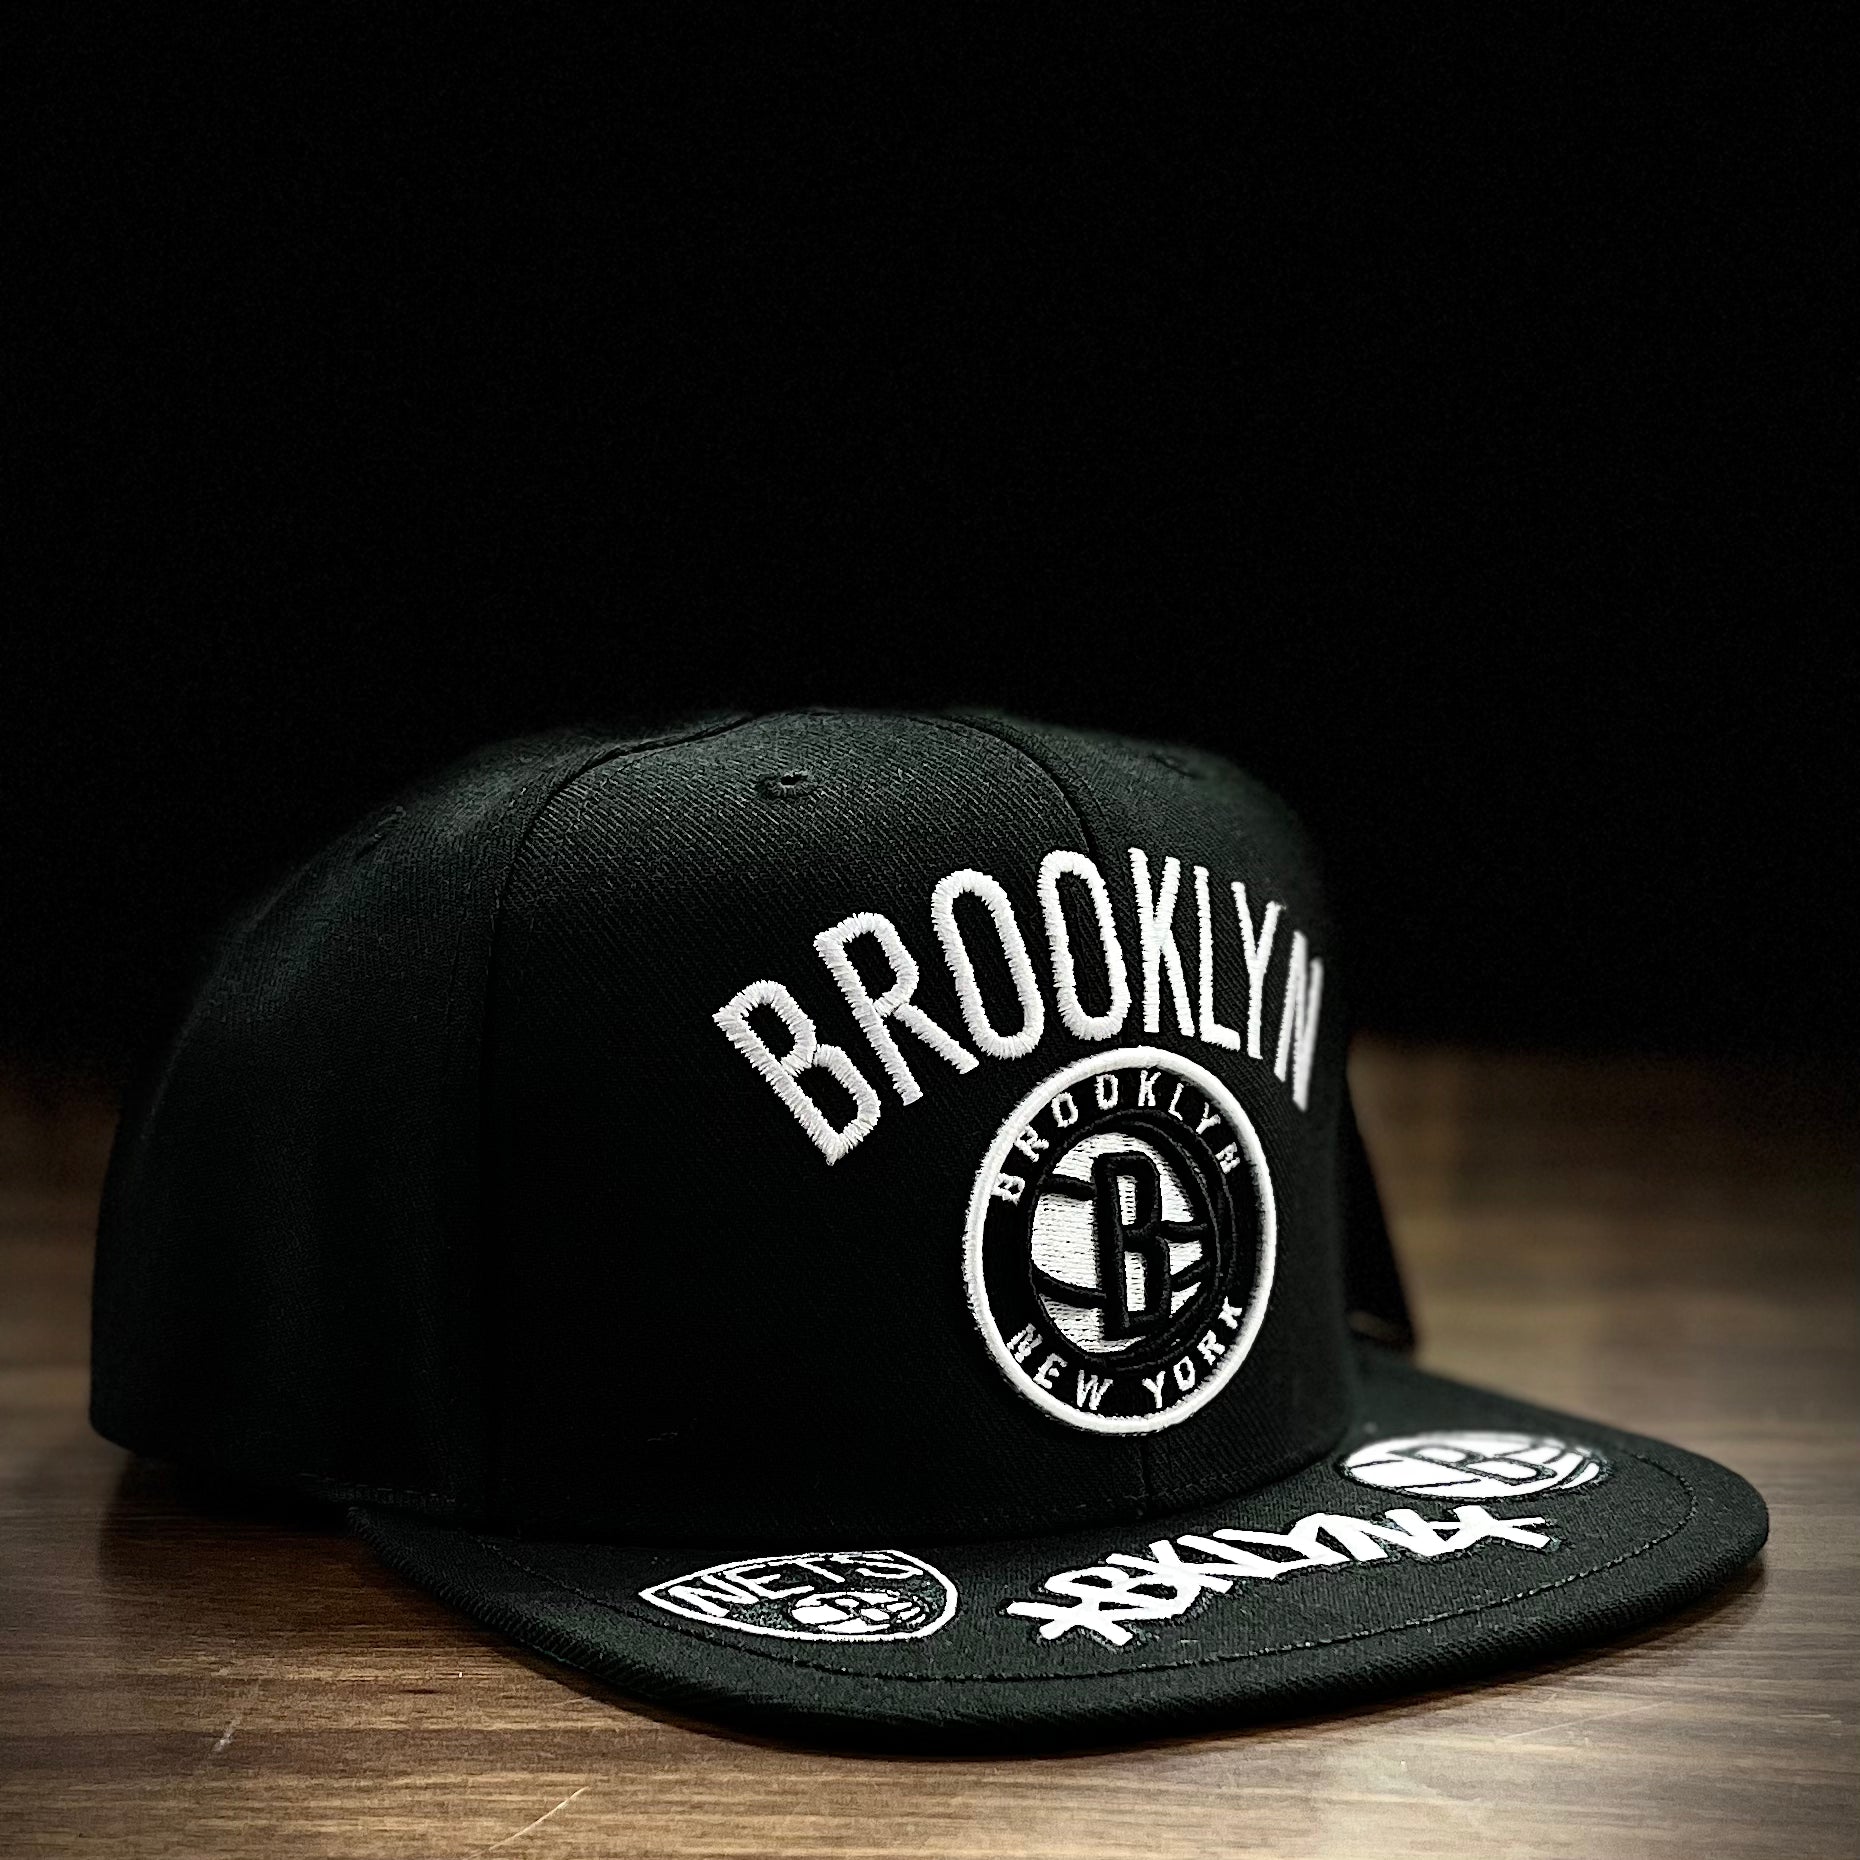 Men's Mitchell & Ness White Brooklyn Nets Hardwood Classics in Your Face Deadstock Snapback Hat